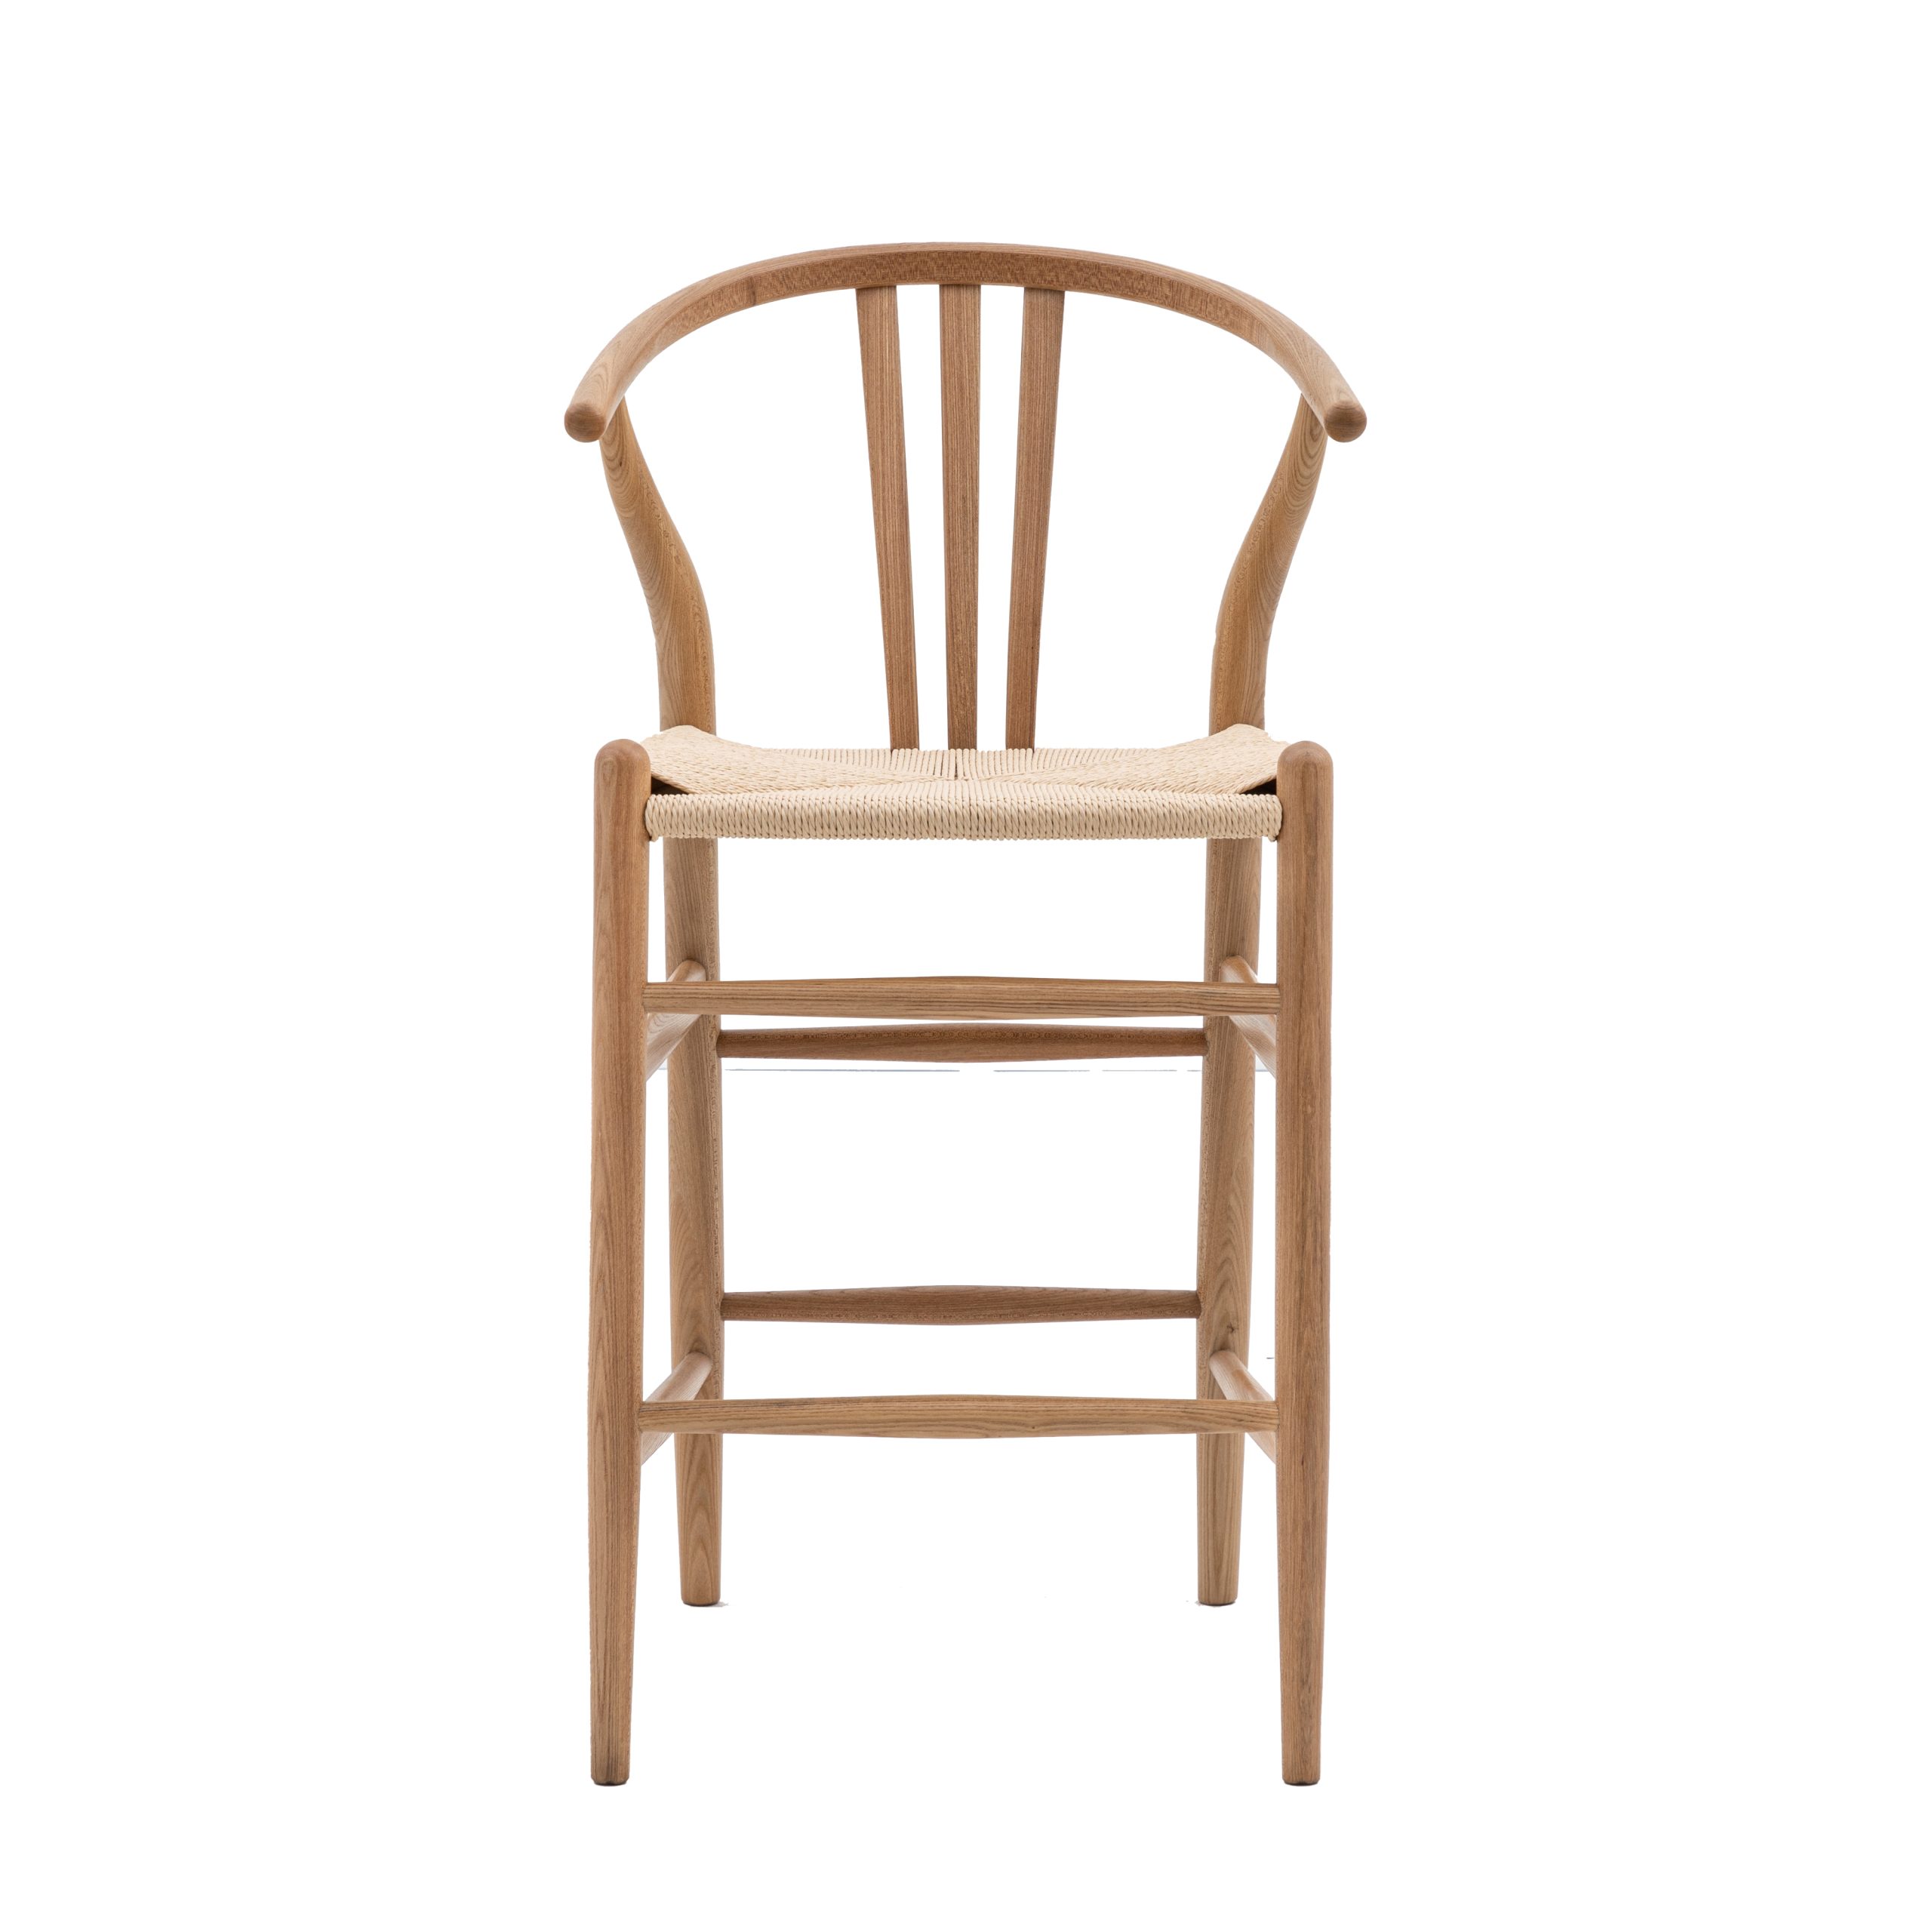 Gallery Direct Whitney Bar Stool Natural (Set of 2)